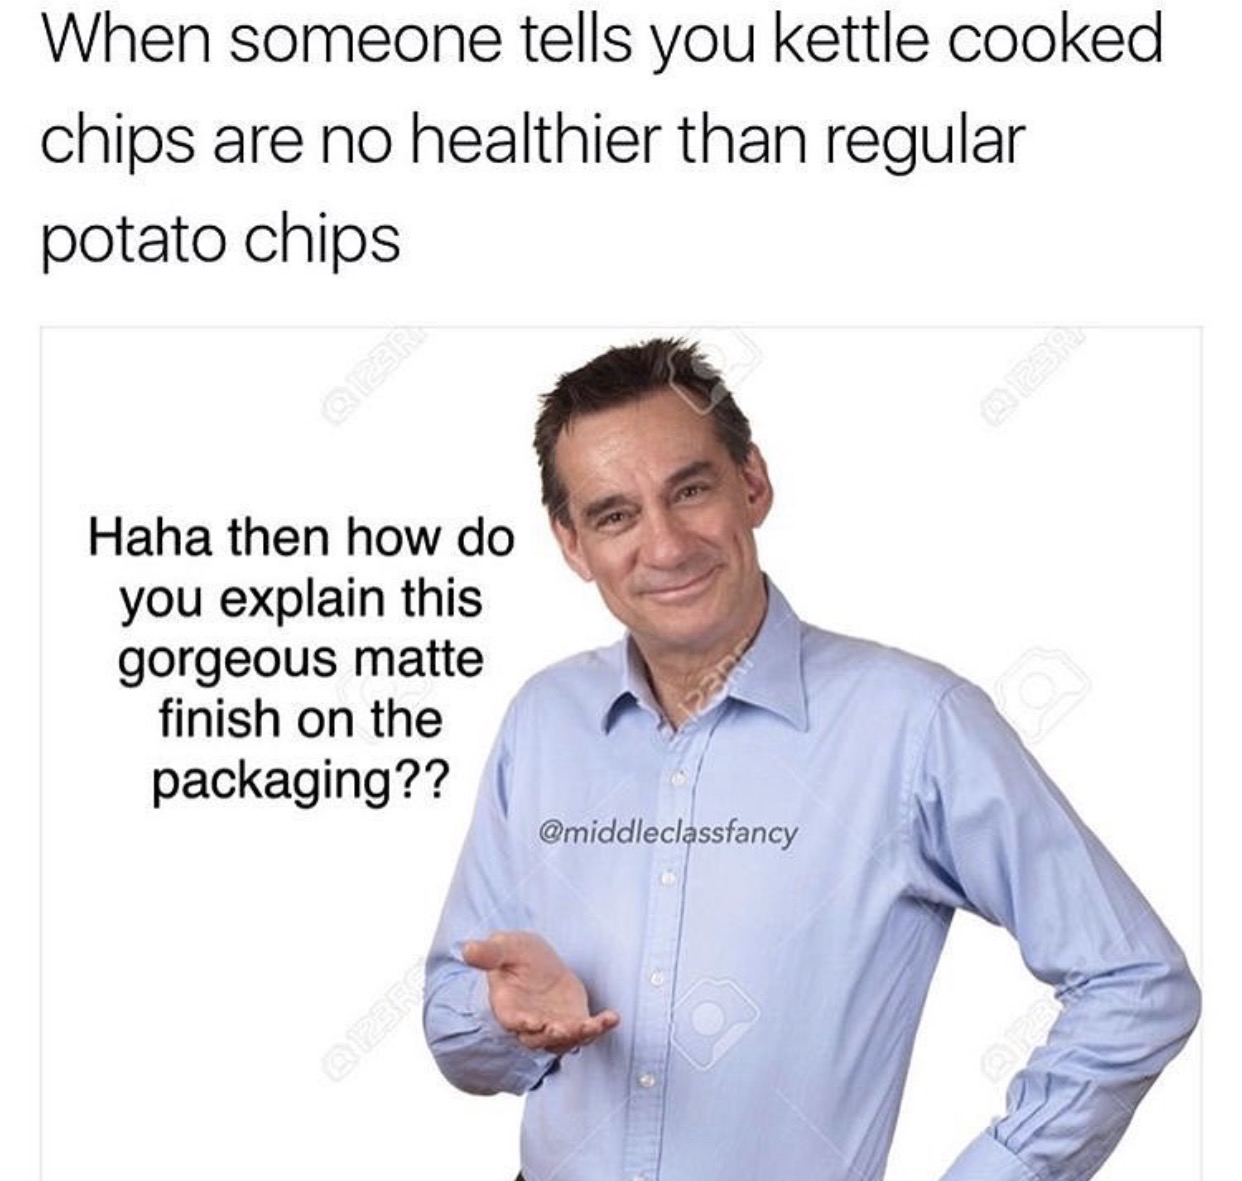 middle class fancy meme nance - When someone tells you kettle cooked chips are no healthier than regular potato chips Haha then how do you explain this gorgeous matte finish on the packaging??